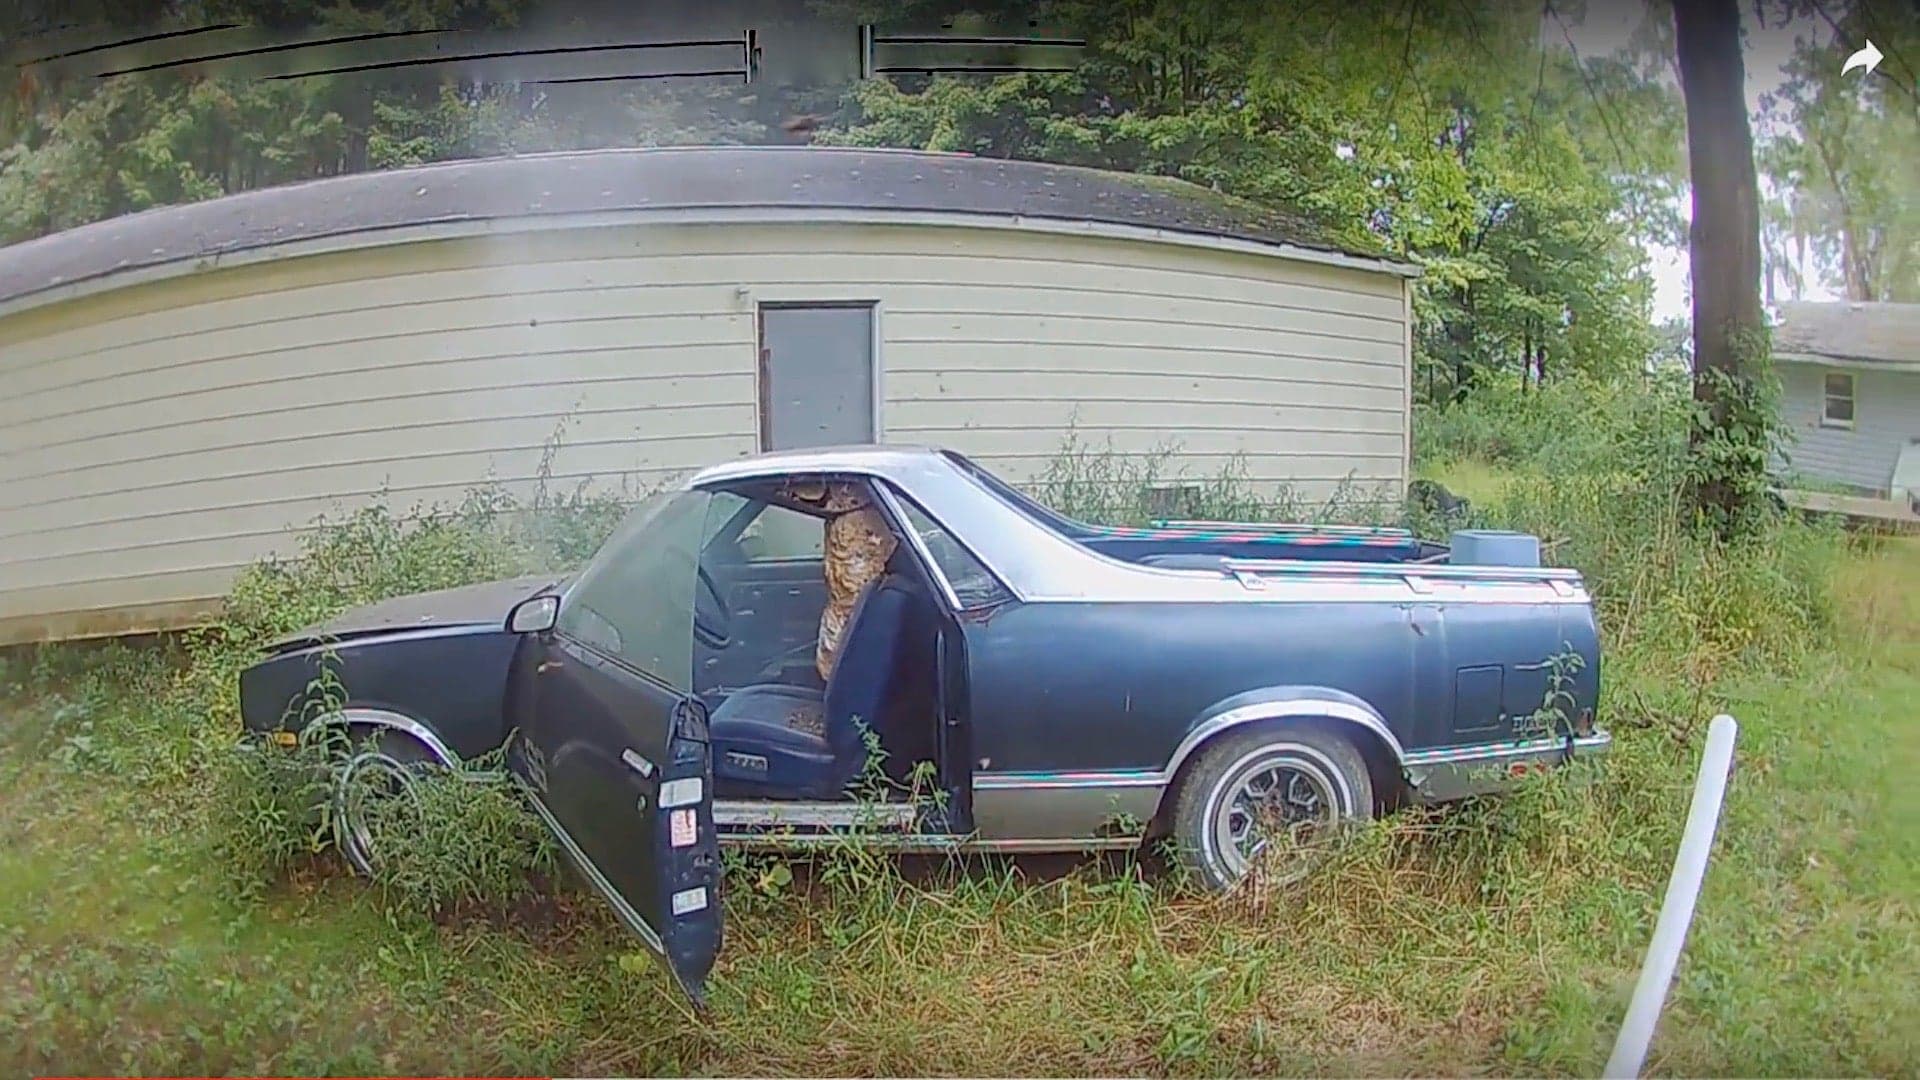 Watch Courageous ‘Bee Man’ Free a Chevrolet El Camino Taken Hostage by Giant Hornets